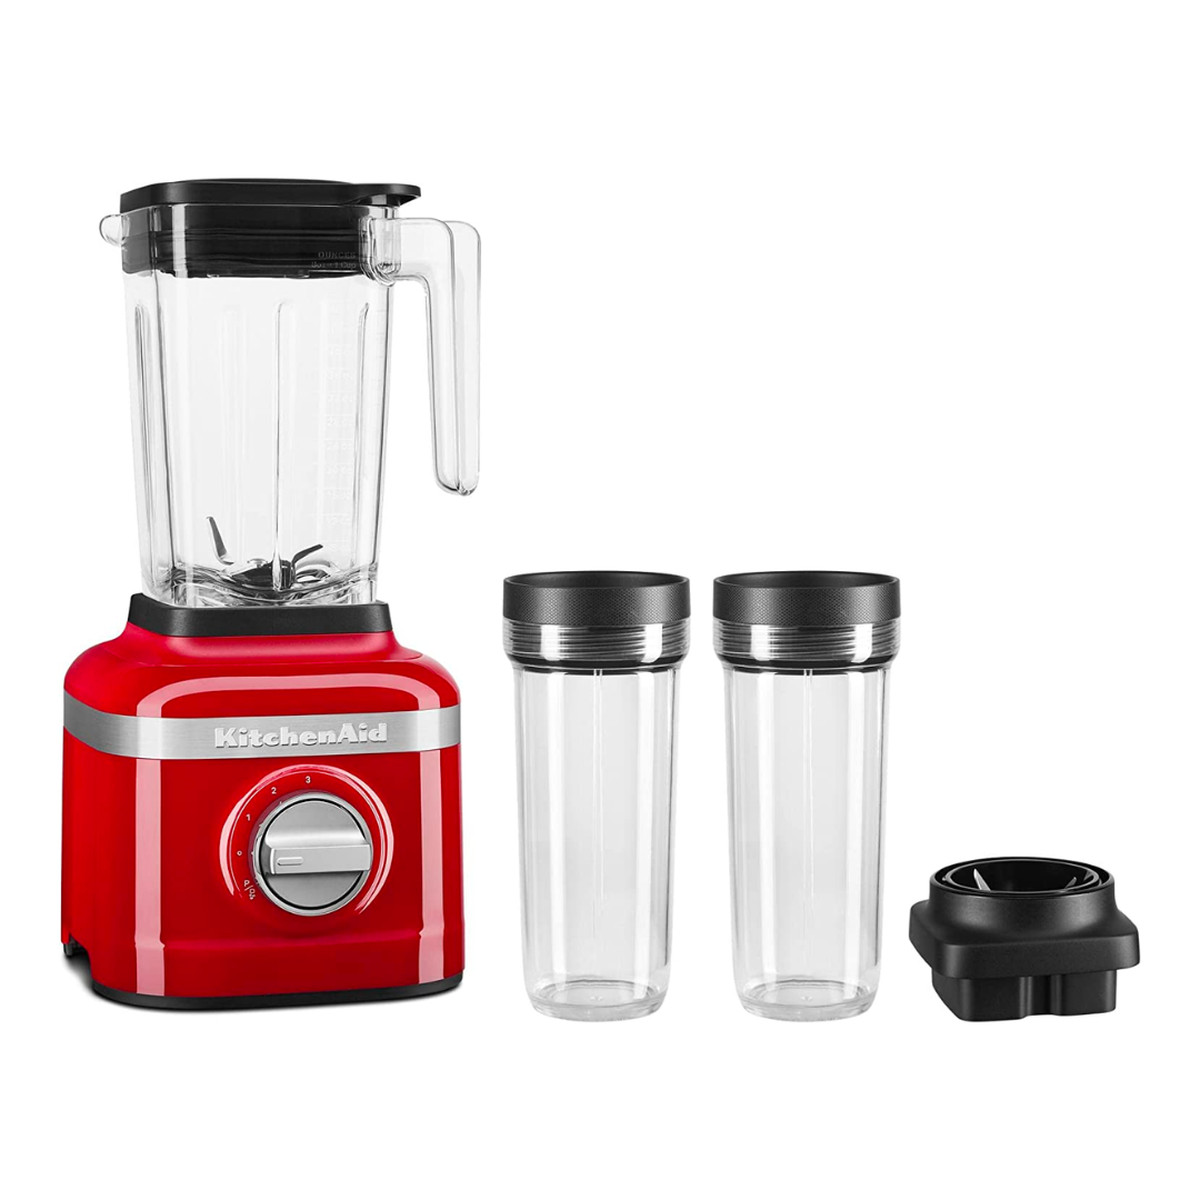 Red KitchenAid blender with single-serve cups